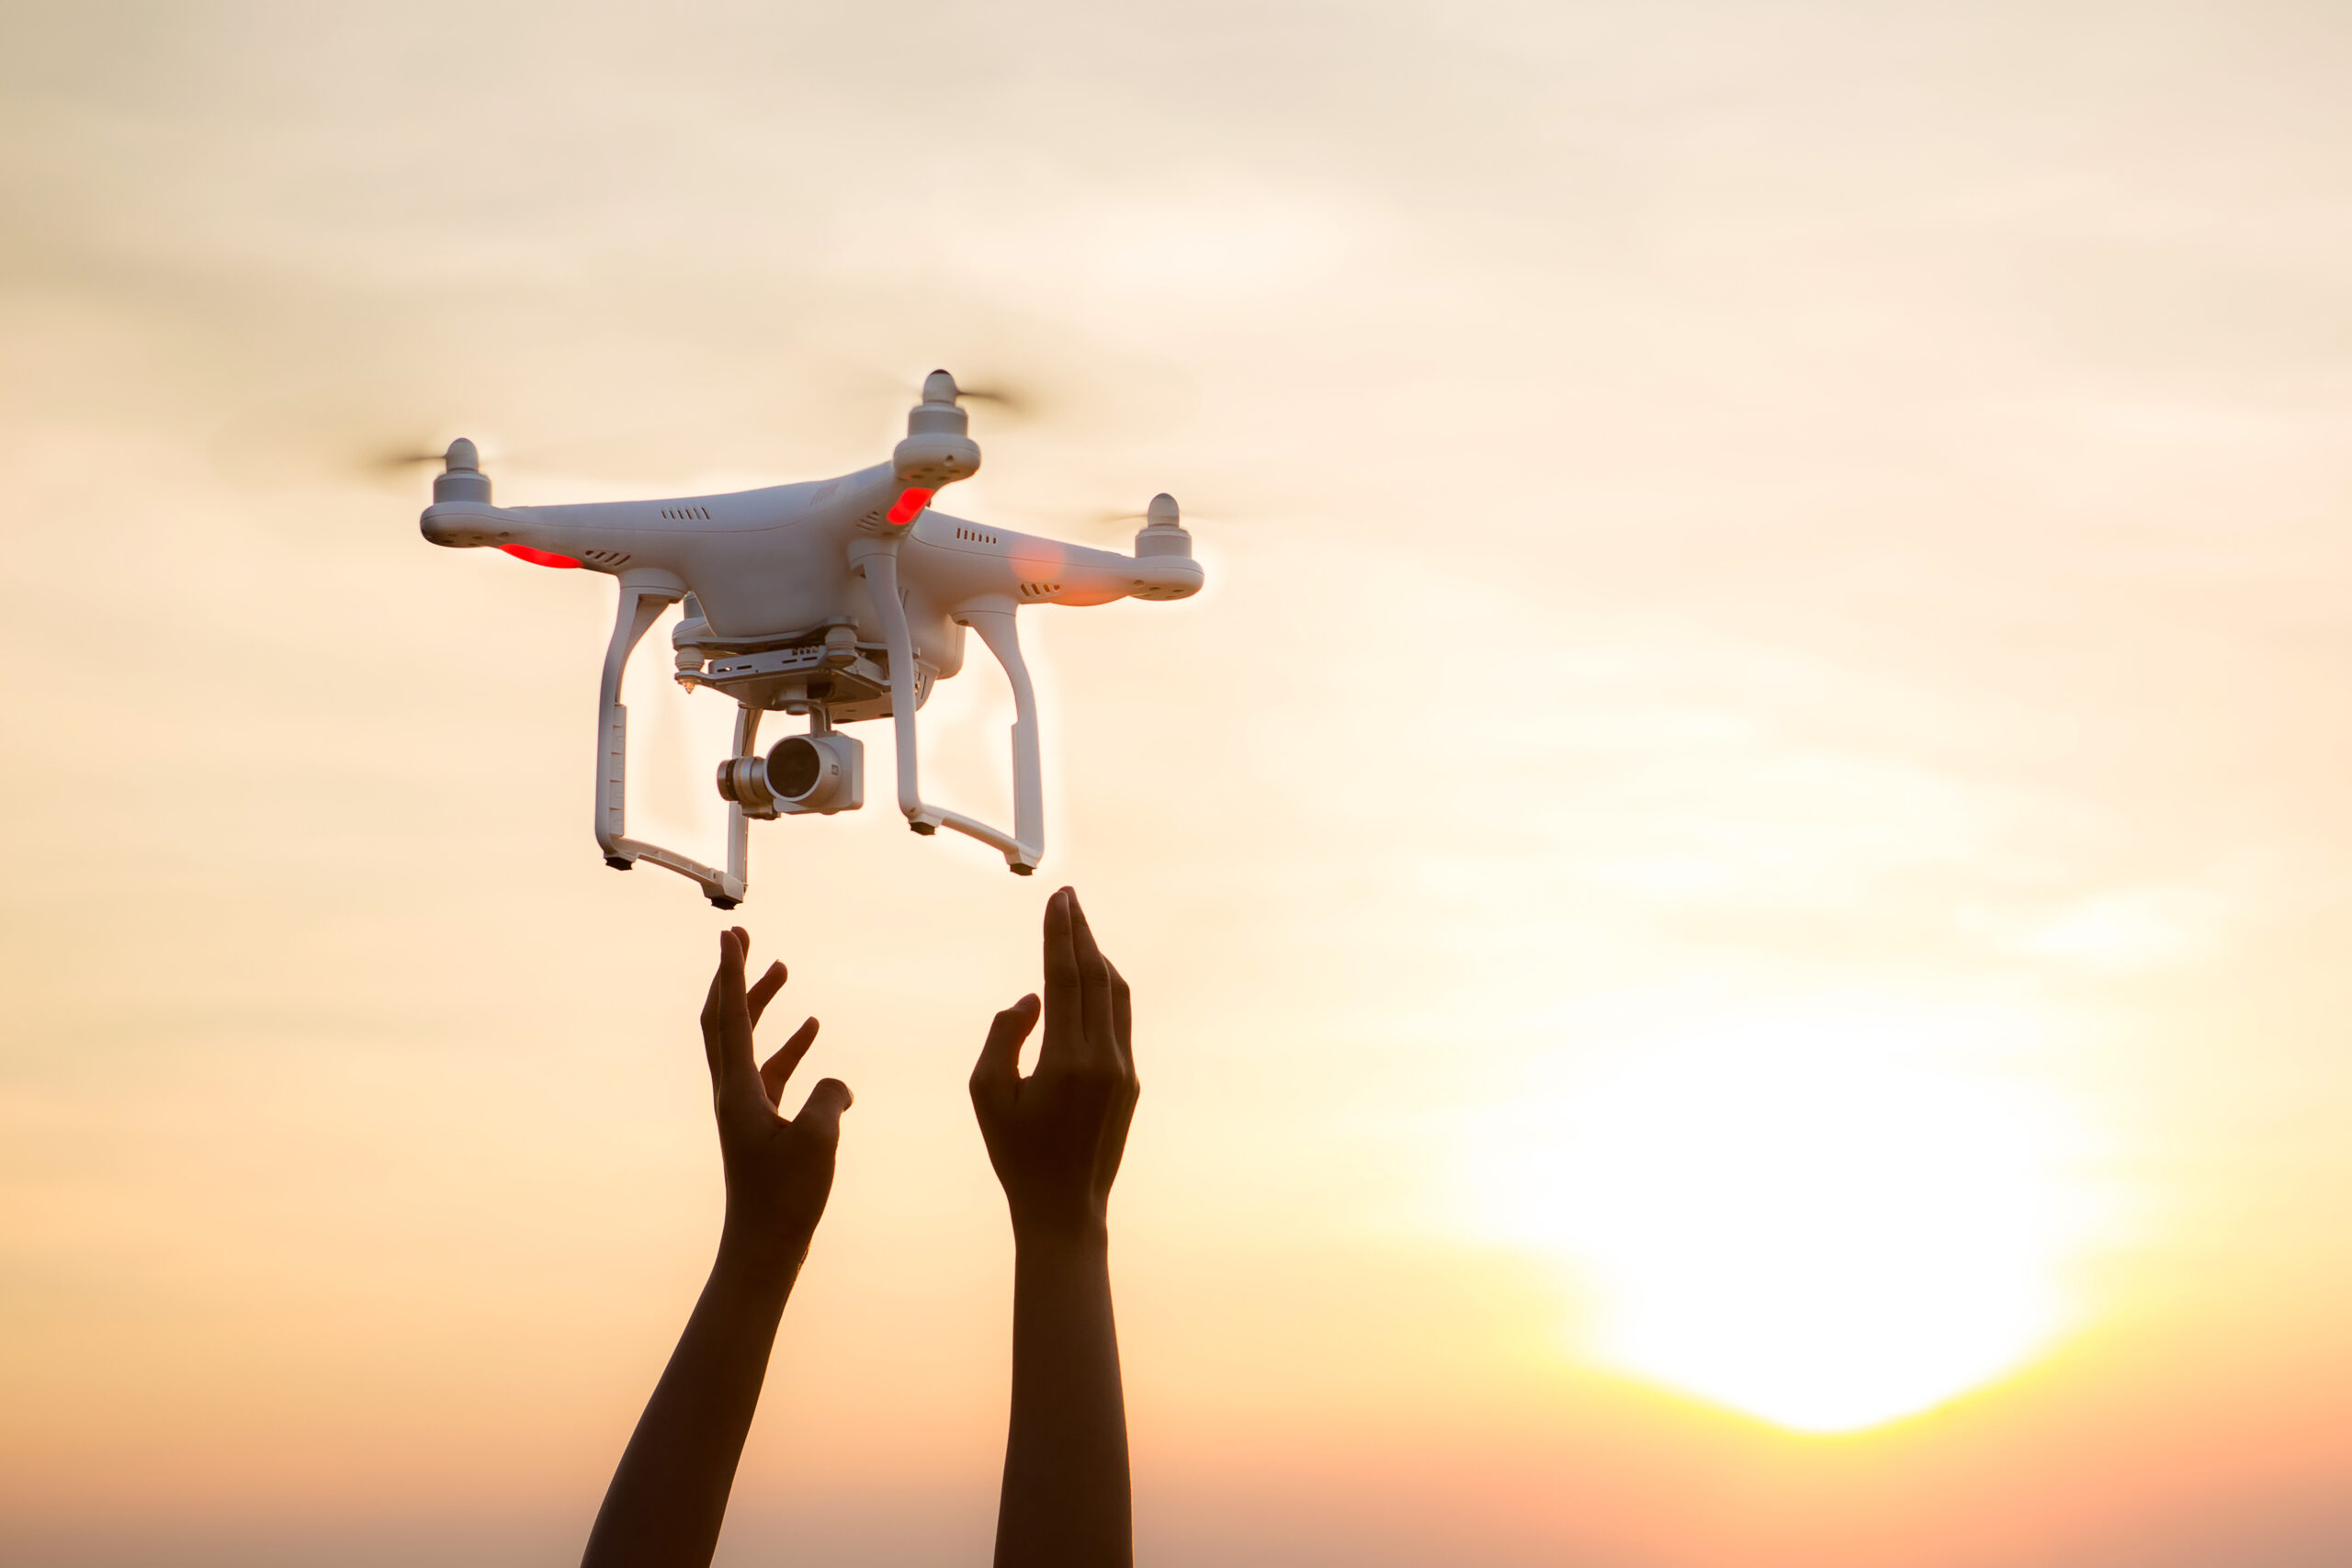 Drones are evolving the aviation ecosystem